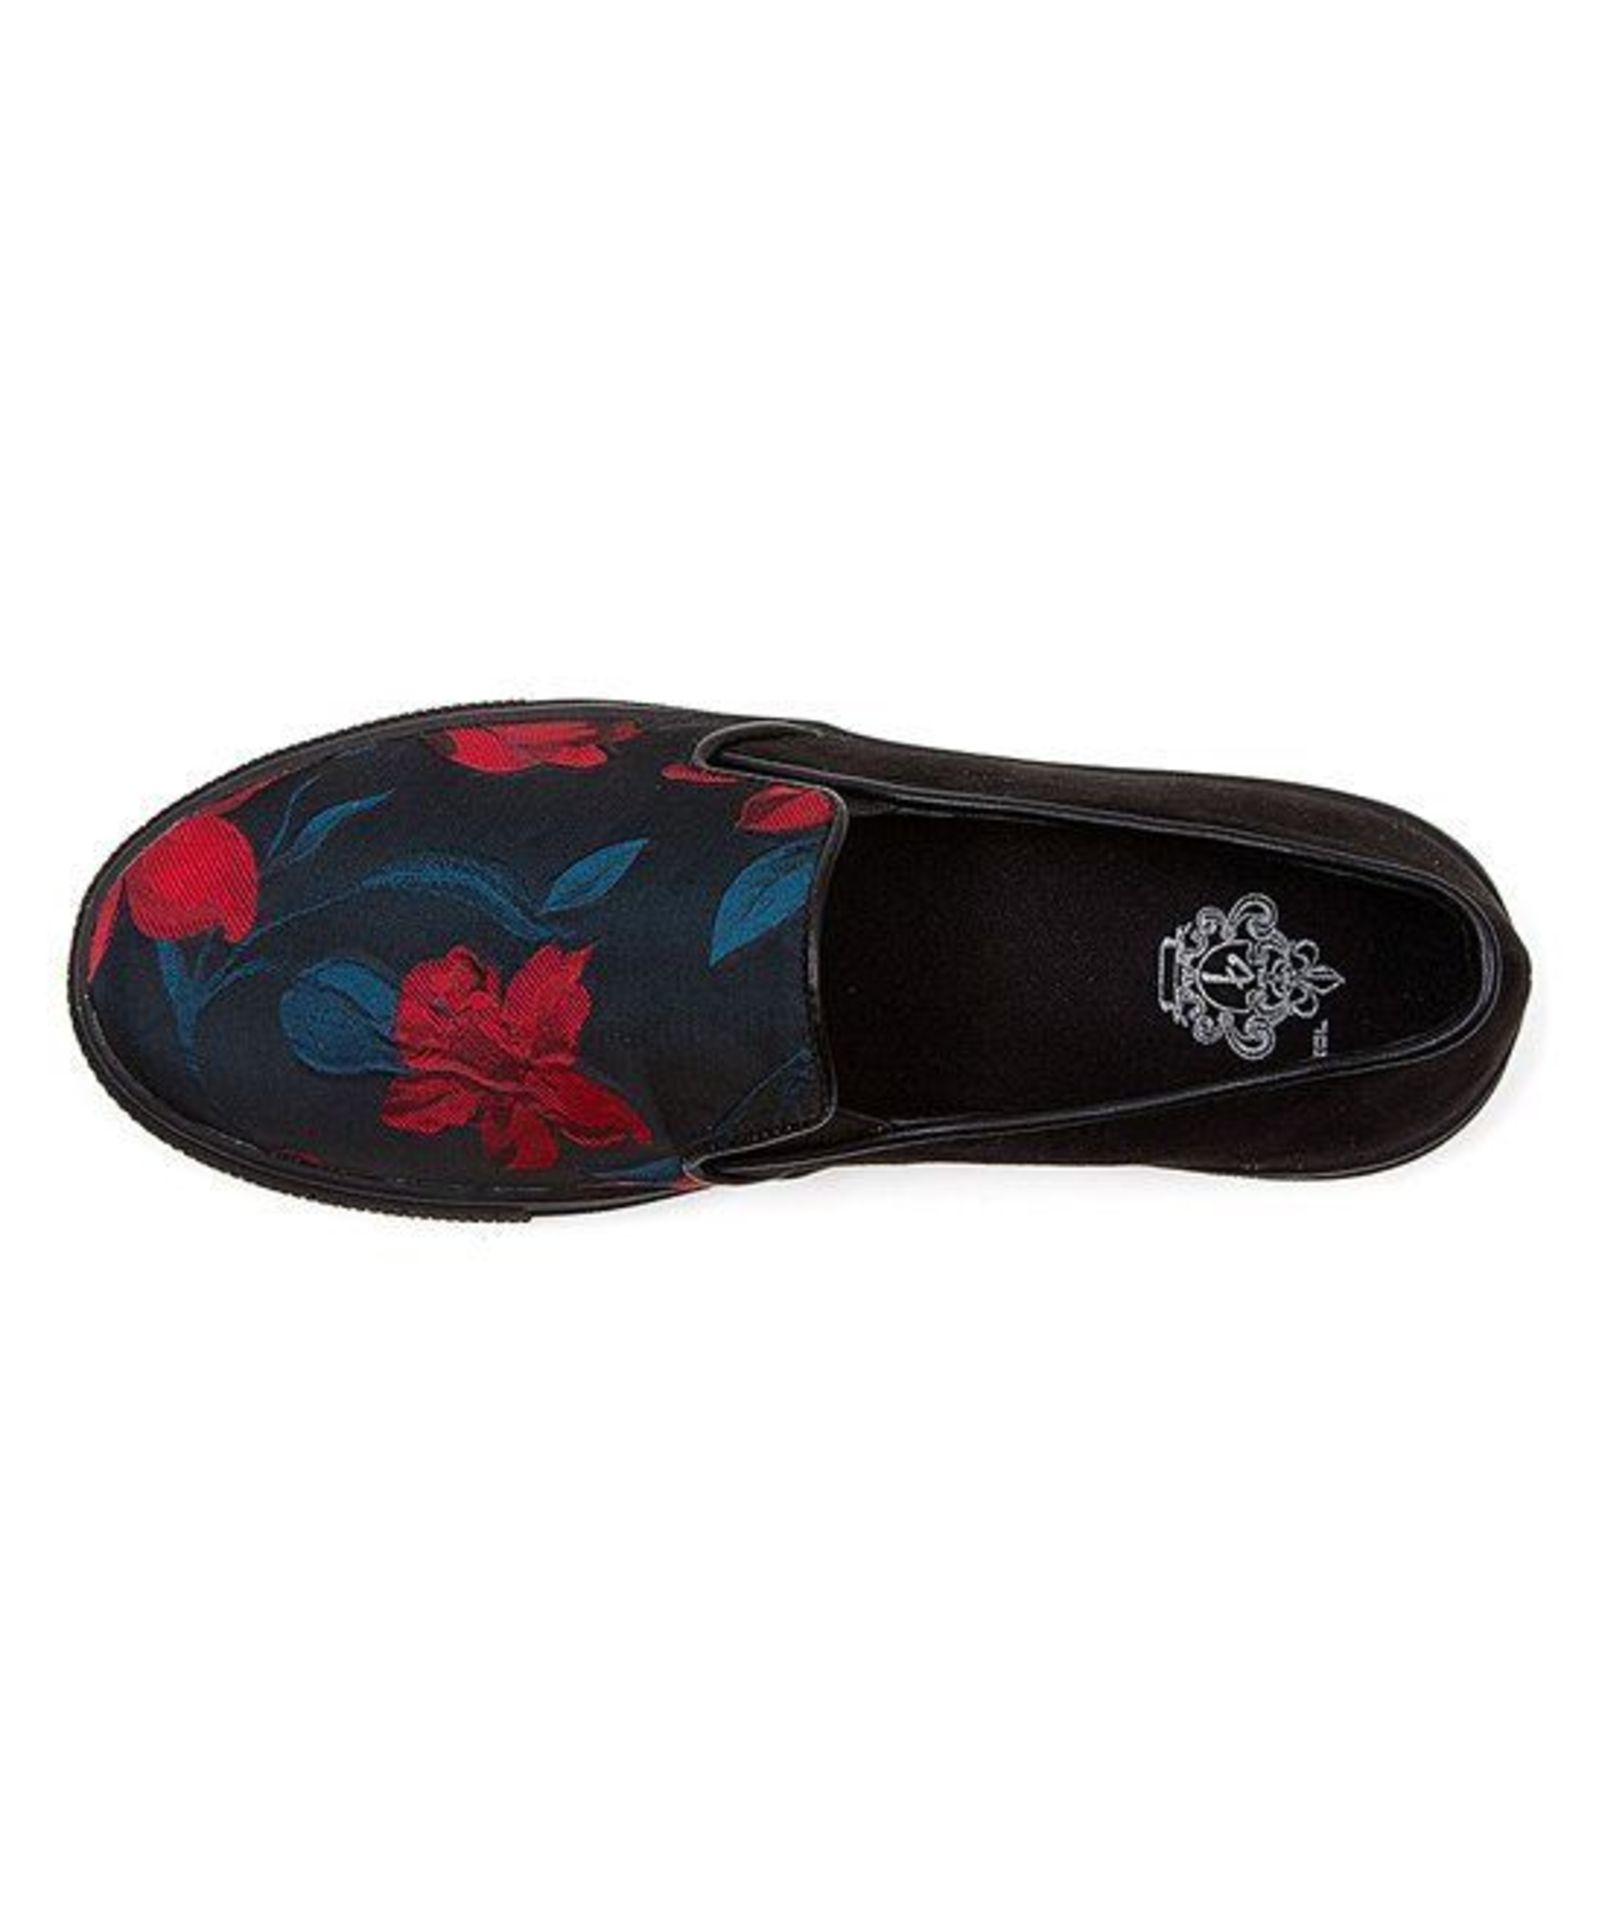 French Blu Black Bloom Sneakers (Uk Size: 5.5/Us Size: 8) (New With Box) [Ref: 50469107- F-002]-Tf - Image 2 of 2